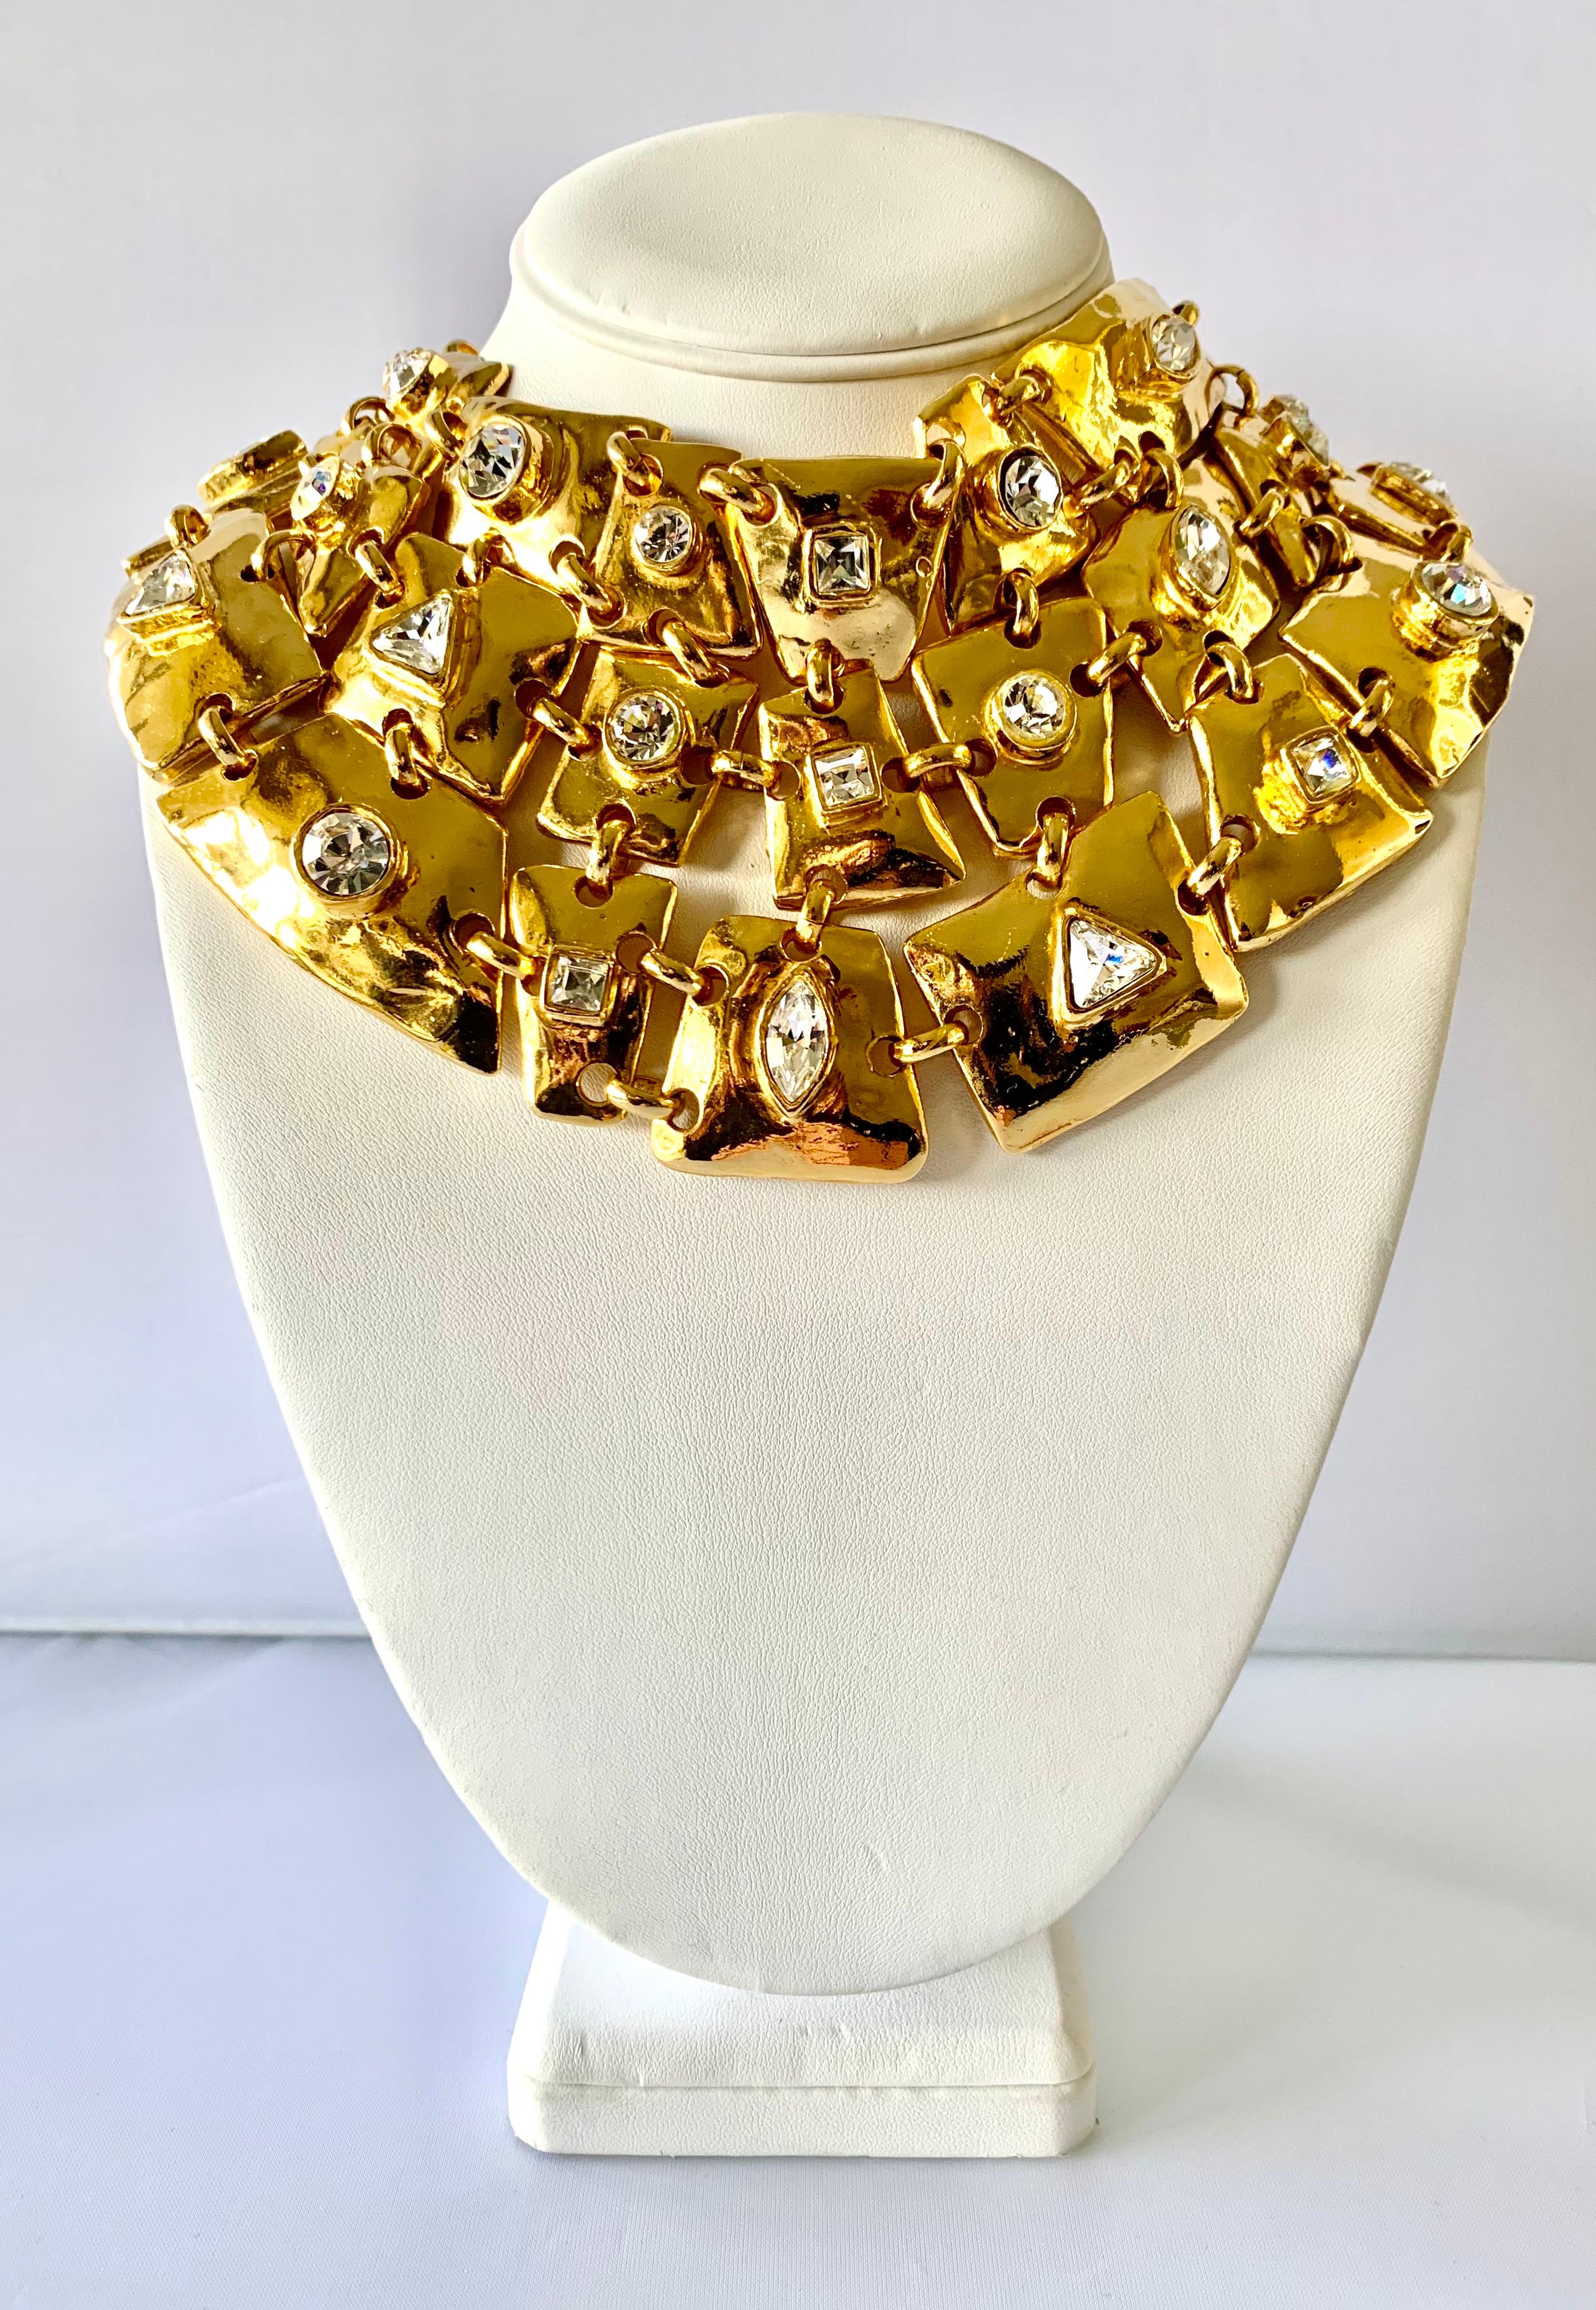 Vintage runway Christian Lacroix necklace comprised out of articulated gilt metal segment adorned with large faceted diamante rhinestones in the center. The articulated plates allow the necklace to sit perfectly on the neck and chest. Signed